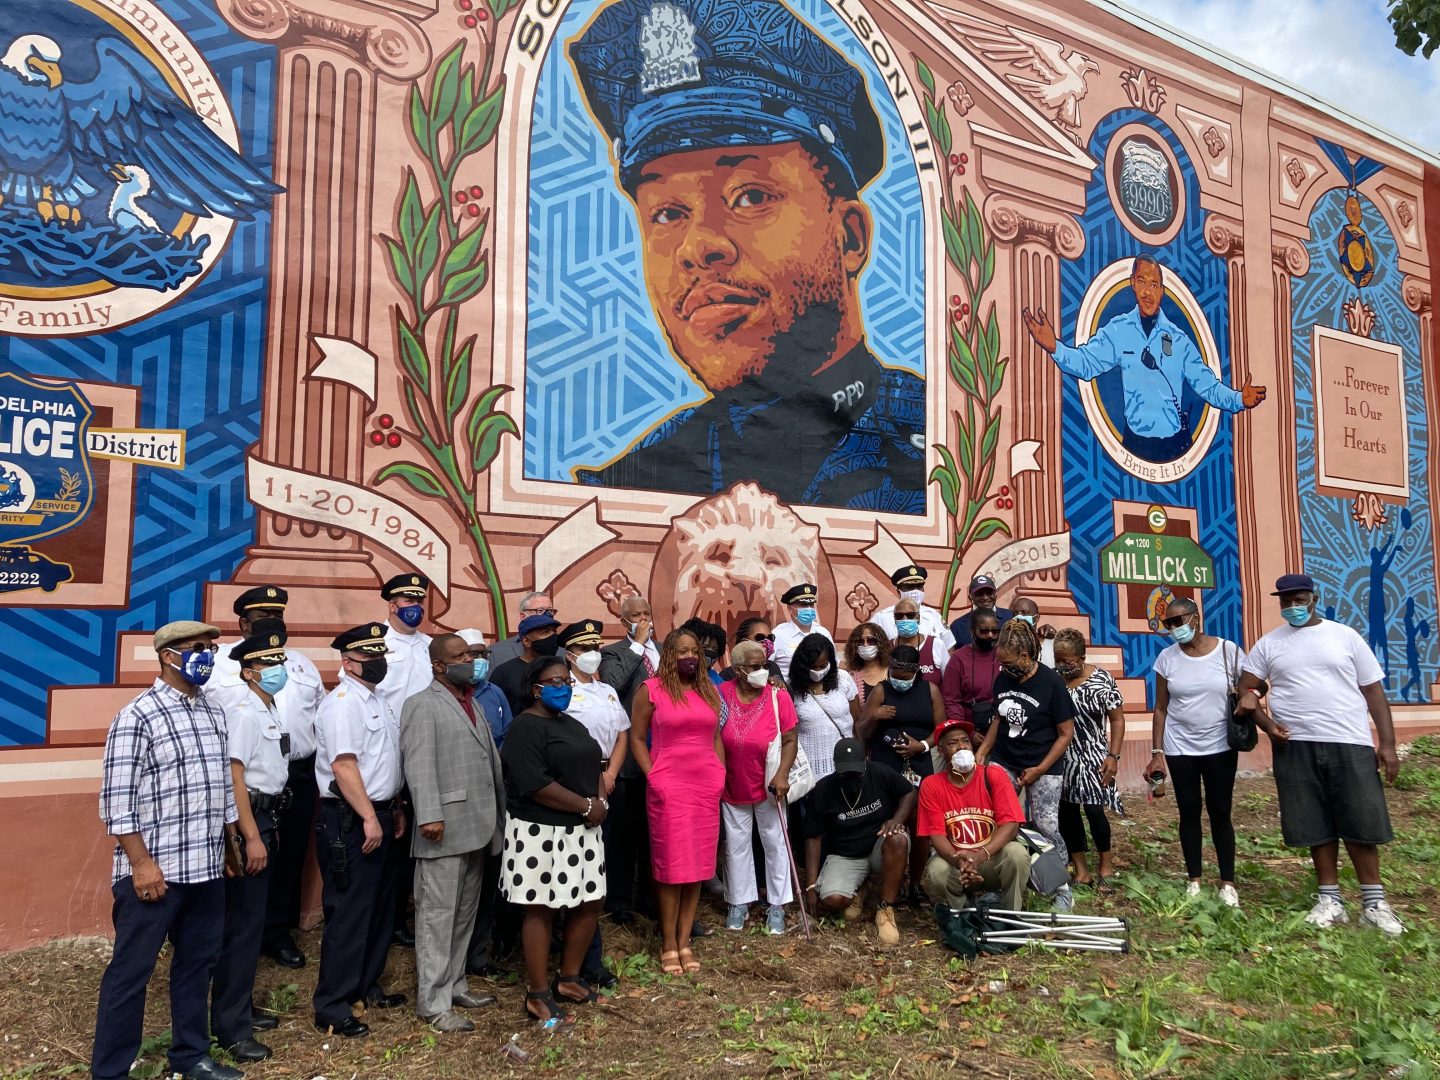 City officials, police officers from the 18th district, and neighborhood residents pose in front of the mural on 61st Street and Baltimore Avenue, dedicated to Sgt. Robert Wilson III.